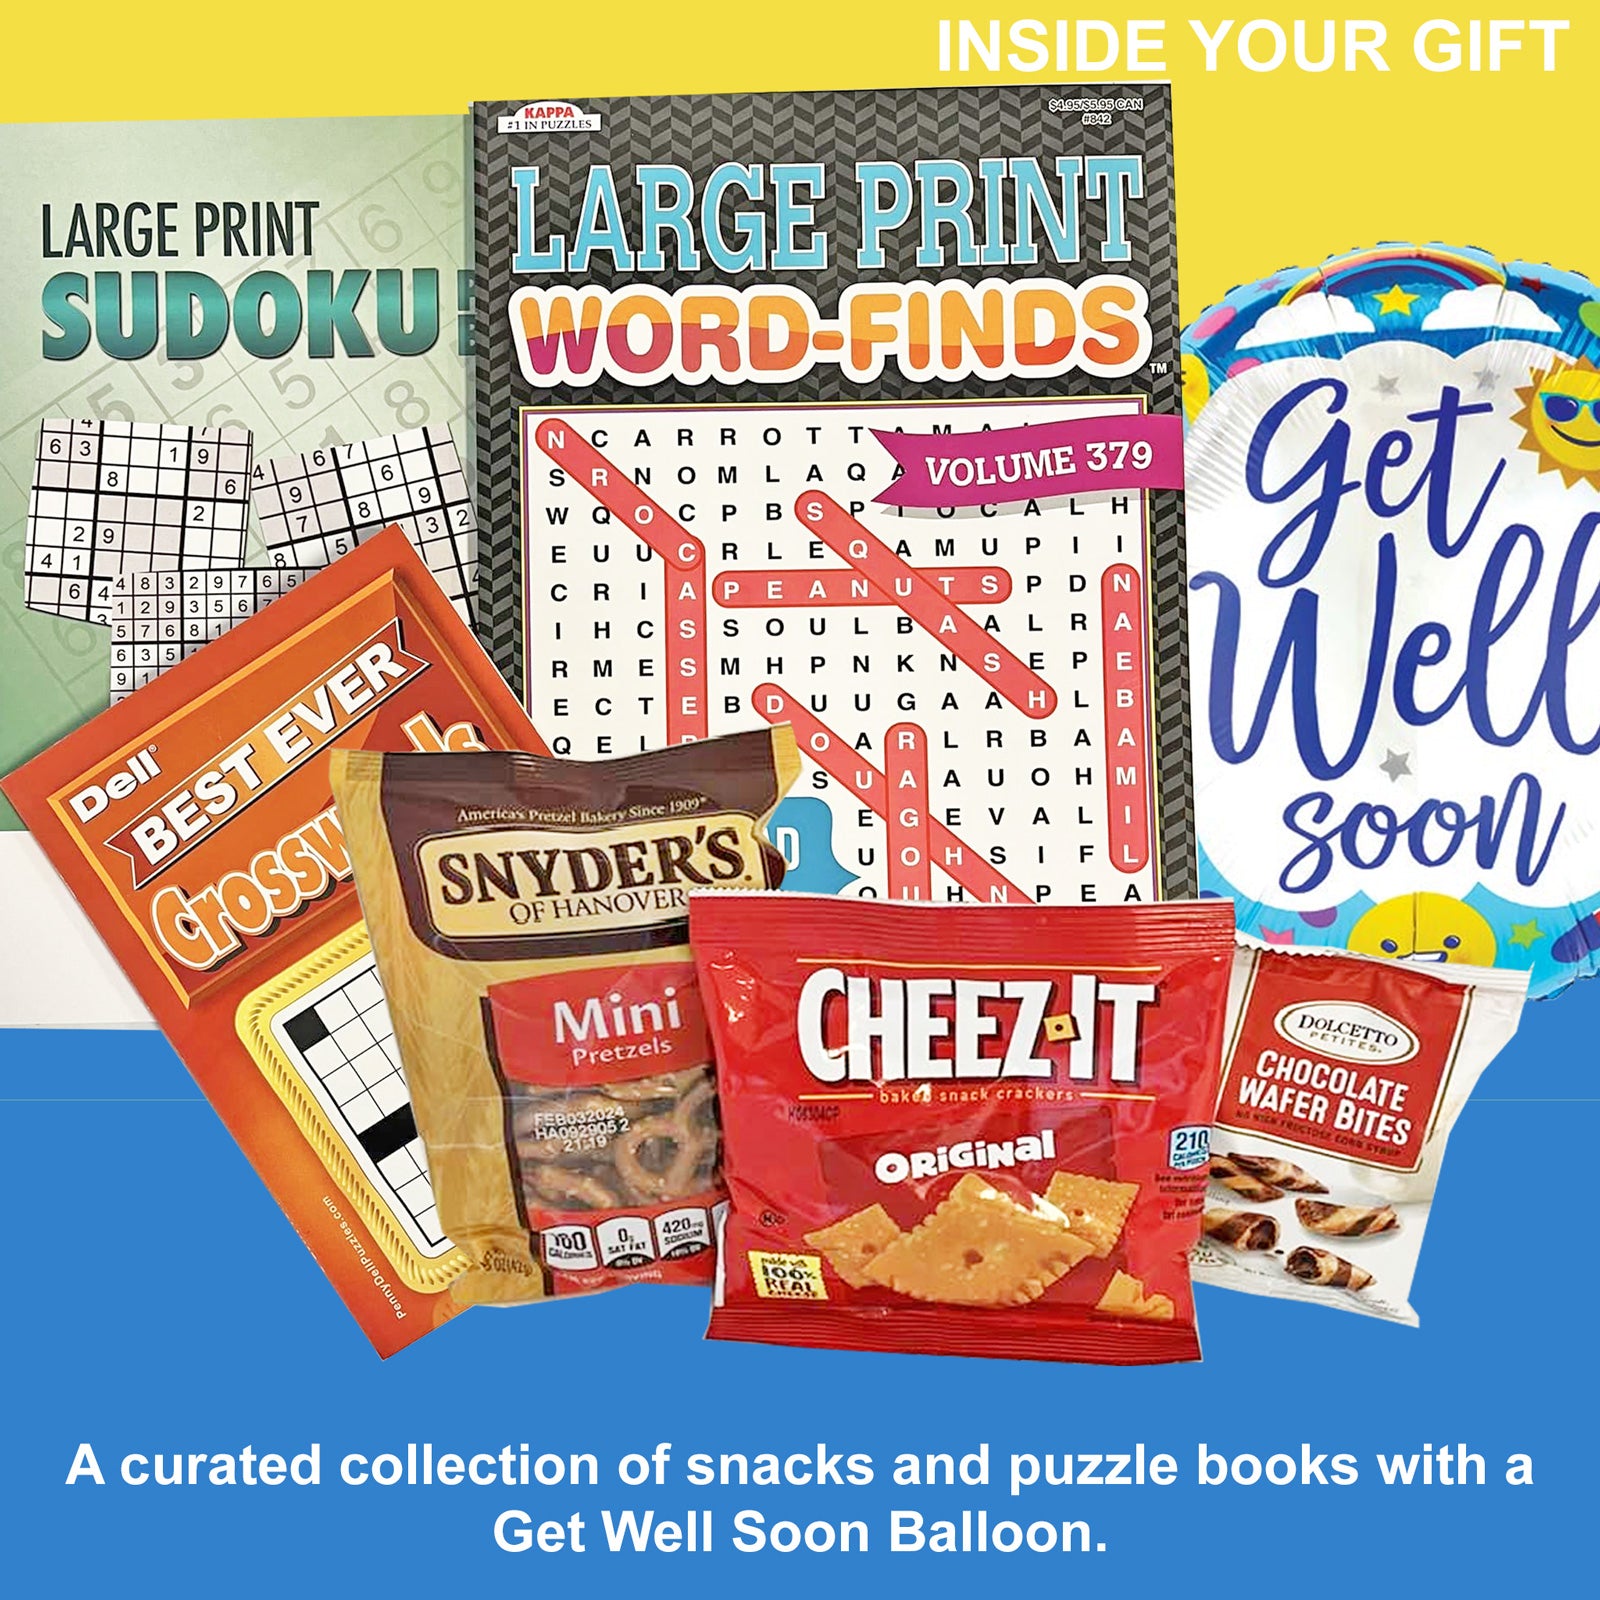 Boredom Buster Get Well Gift Box Enjoyable Get-Well Gift for Men, Women, Friends and Family with Snacks, Puzzle Books and Balloon